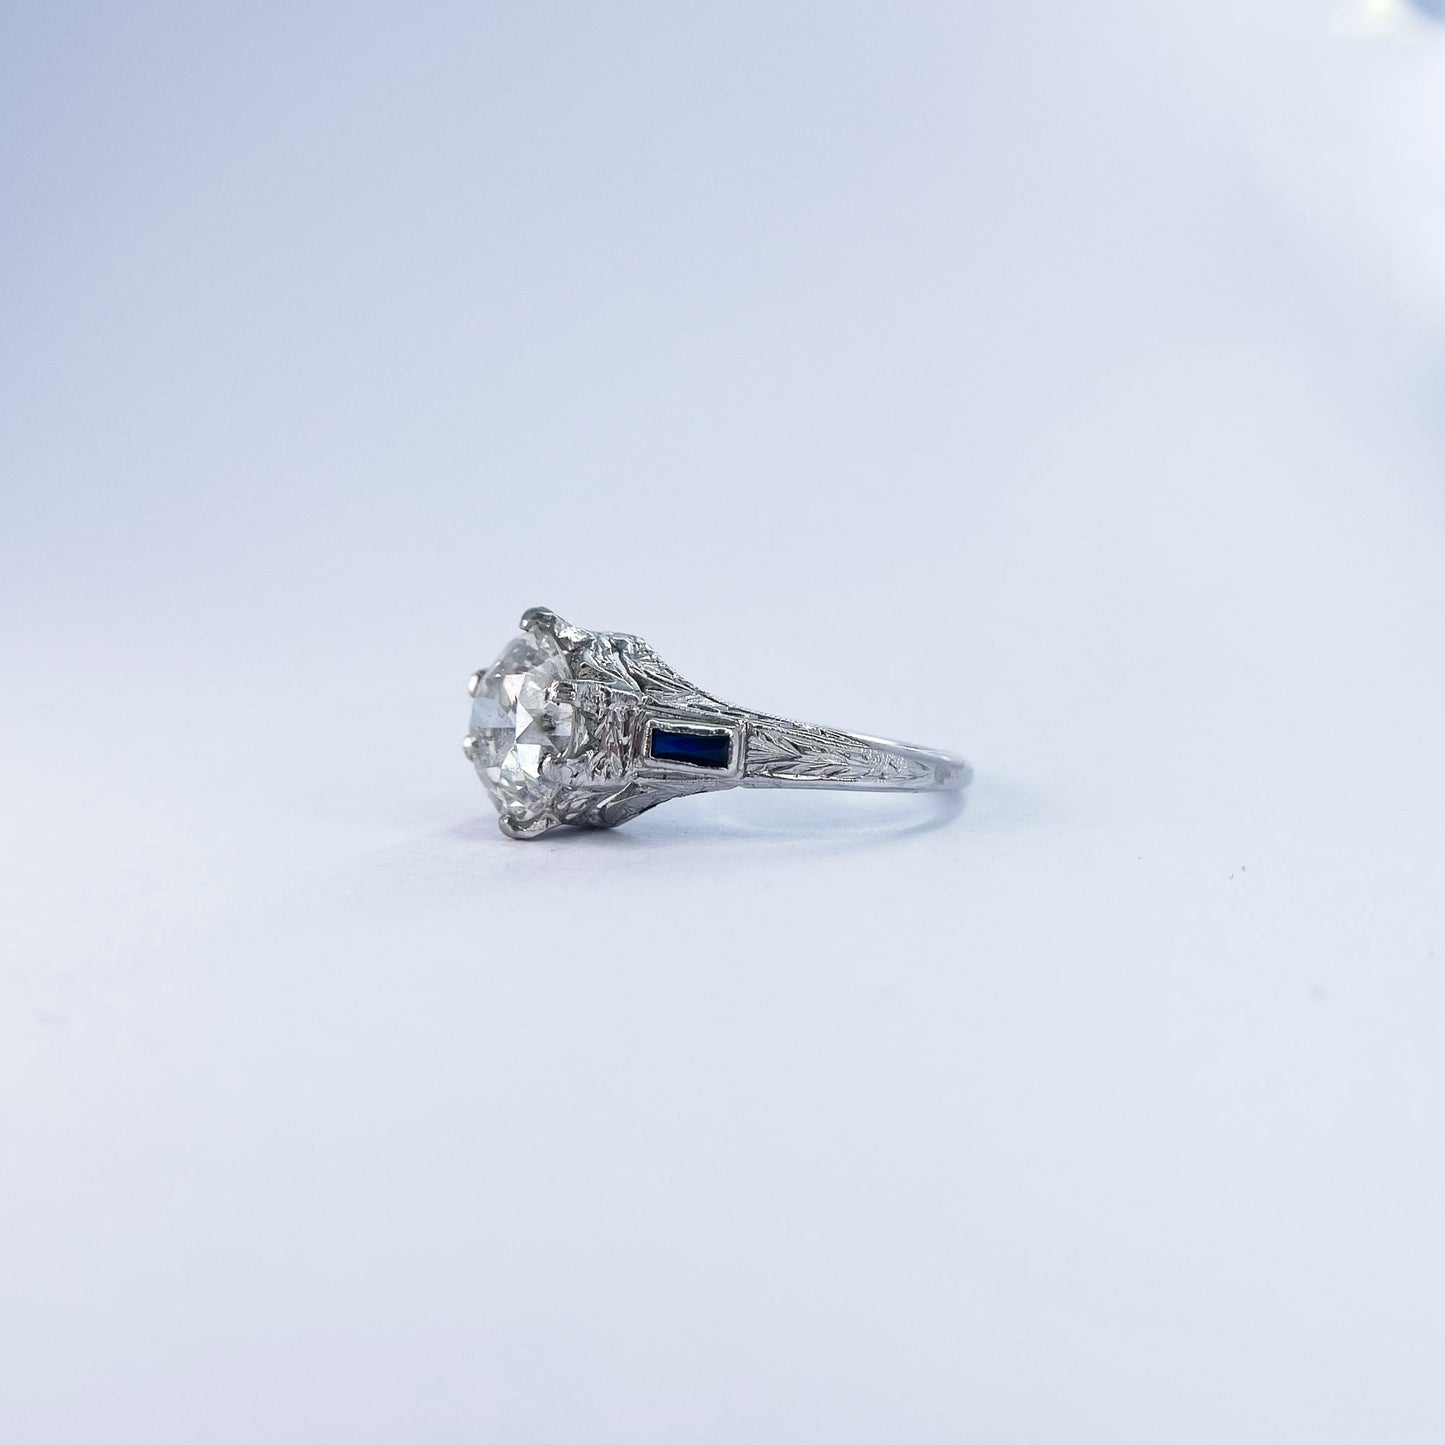 1920s Art Deco Old European Round Cut Diamond and French Cut Sapphire Ring in 20K White Gold